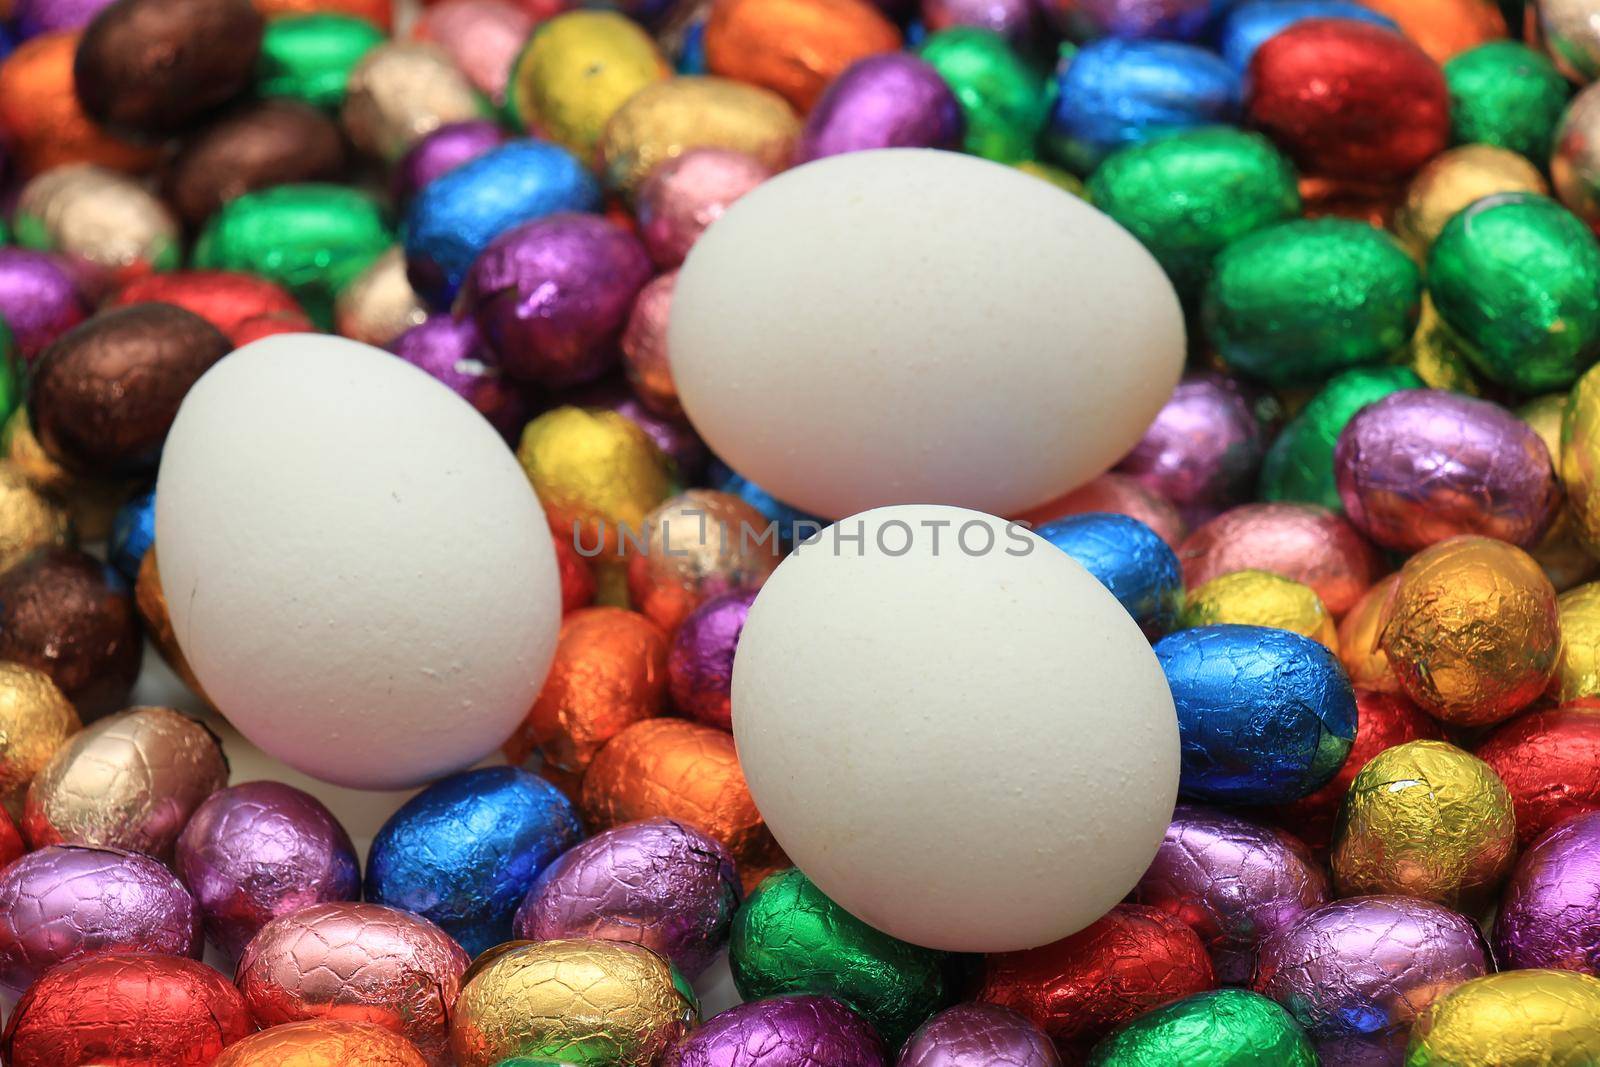 Hen eggs on a pile of colorful wrapped chocolate easter eggs by studioportosabbia